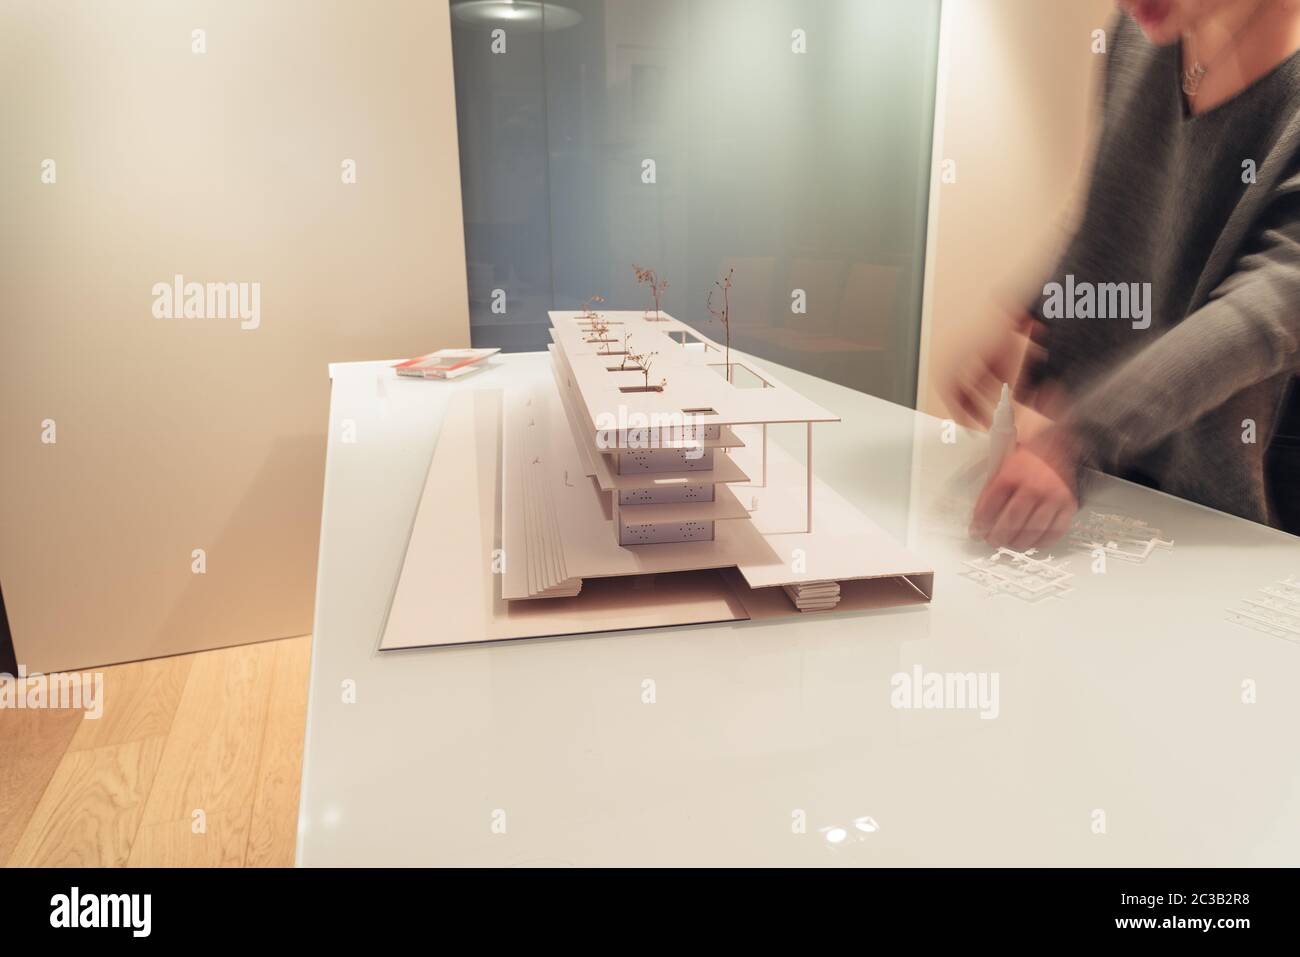 Female architect working on architecture model made with cardboard on table in office of architectural firm. She is moving, motion blurred. Stock Photo